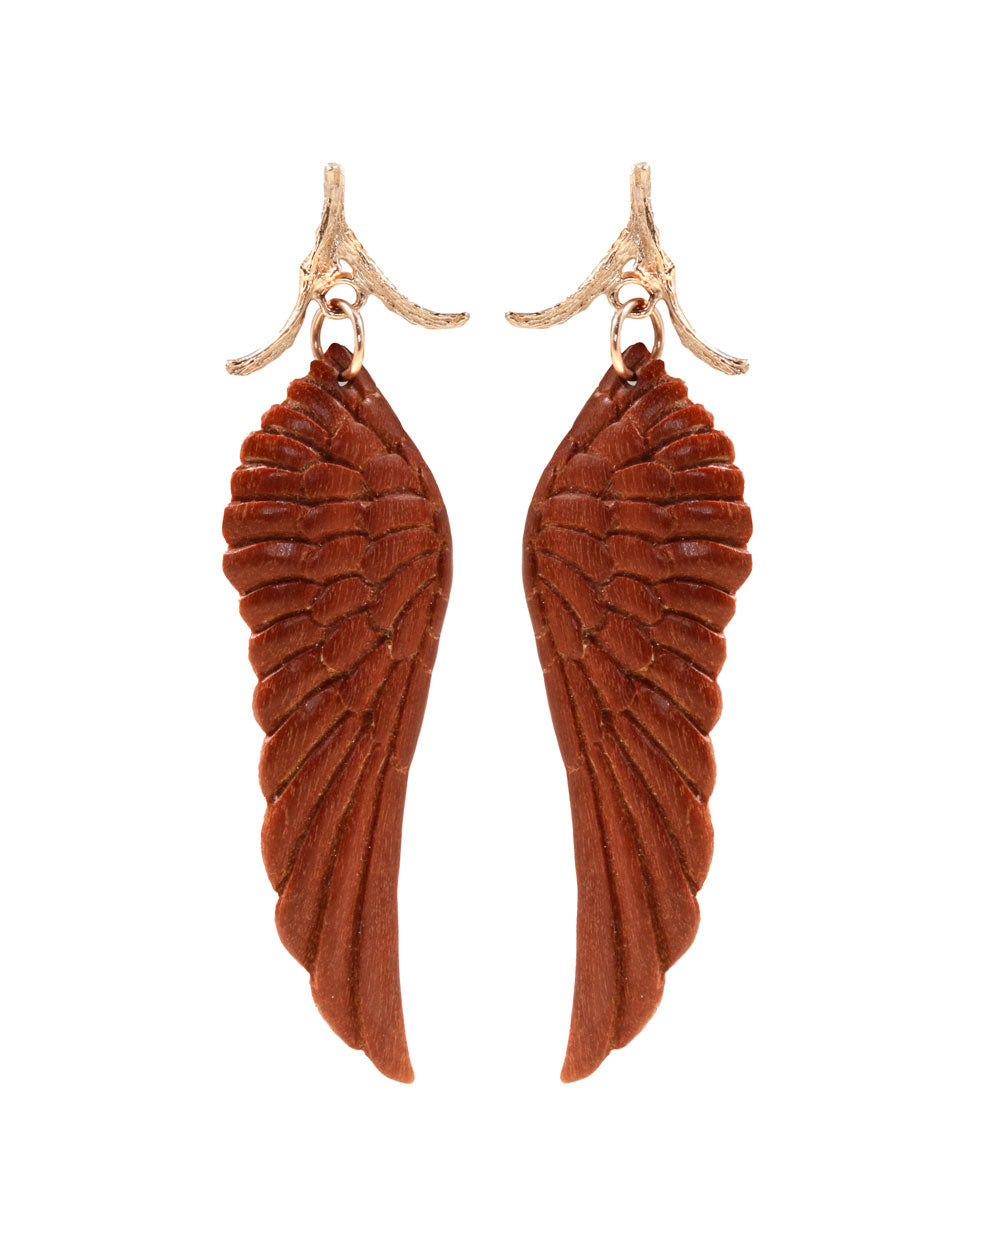 Yellow Gold Carved Sawo Wood Twig Top Angel Wing Earrings